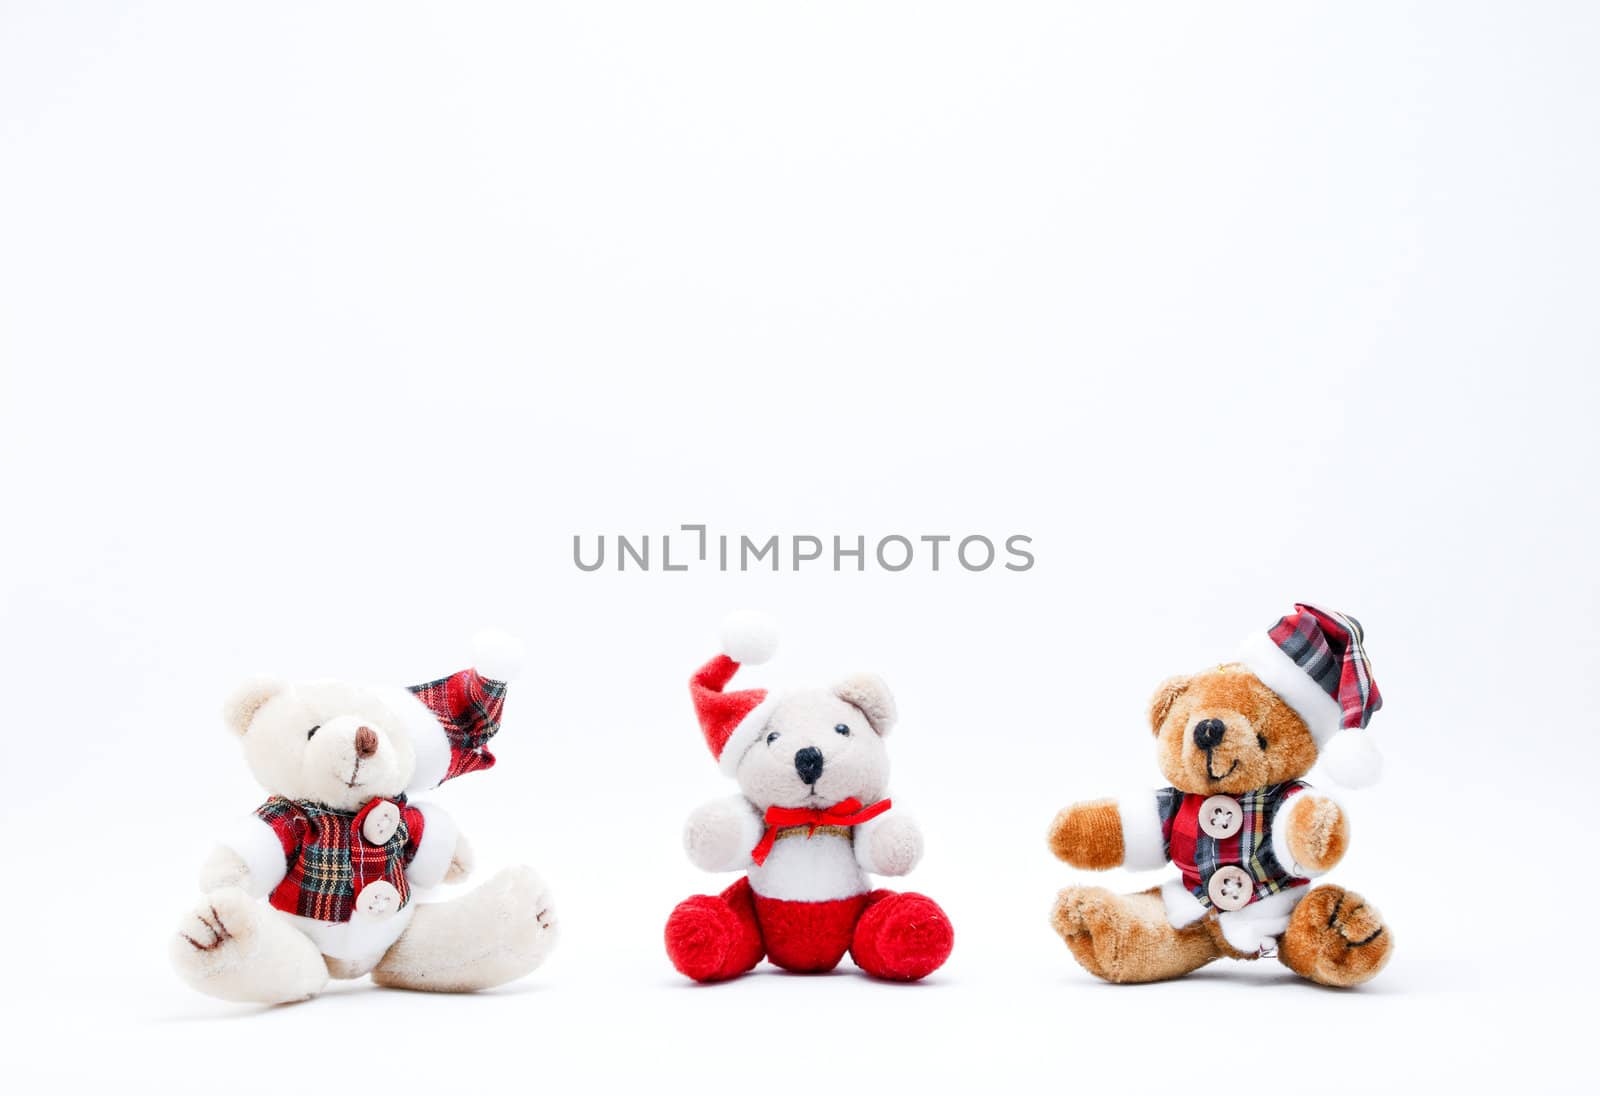 Three Christmas Cuddly Toys on a White Background.